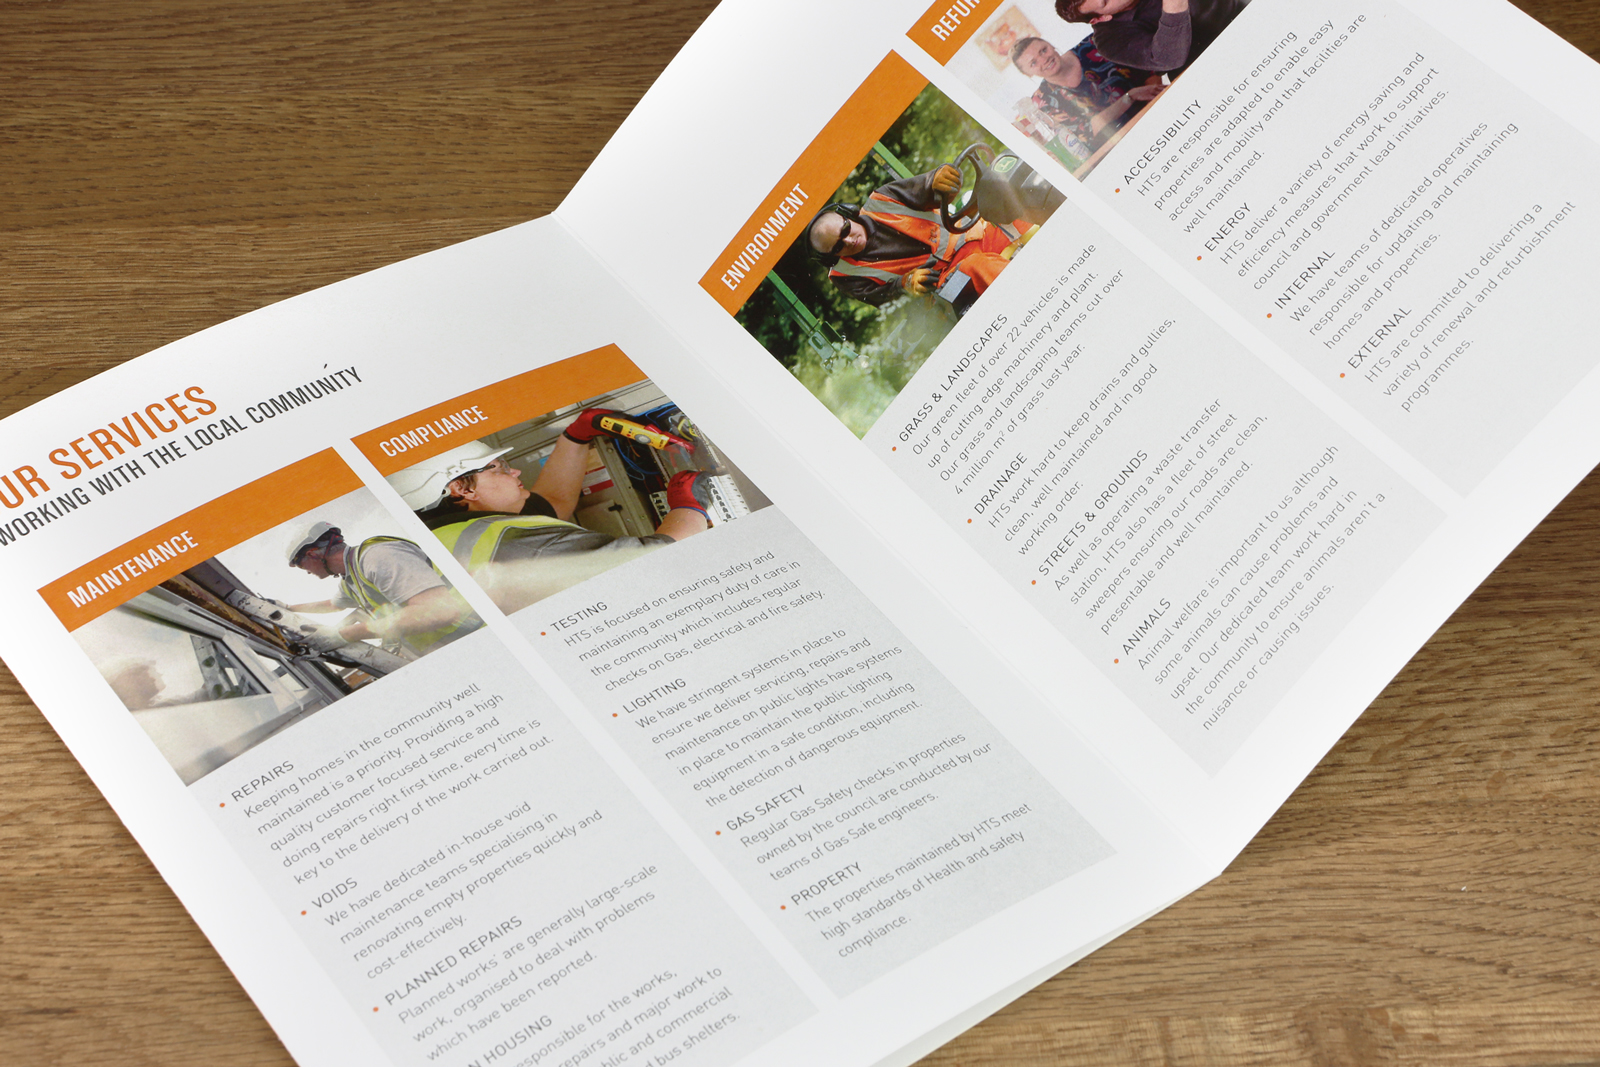 A5 leaflet design and production for HTS Group, in partnership with Magnificent Stuff, Harlow